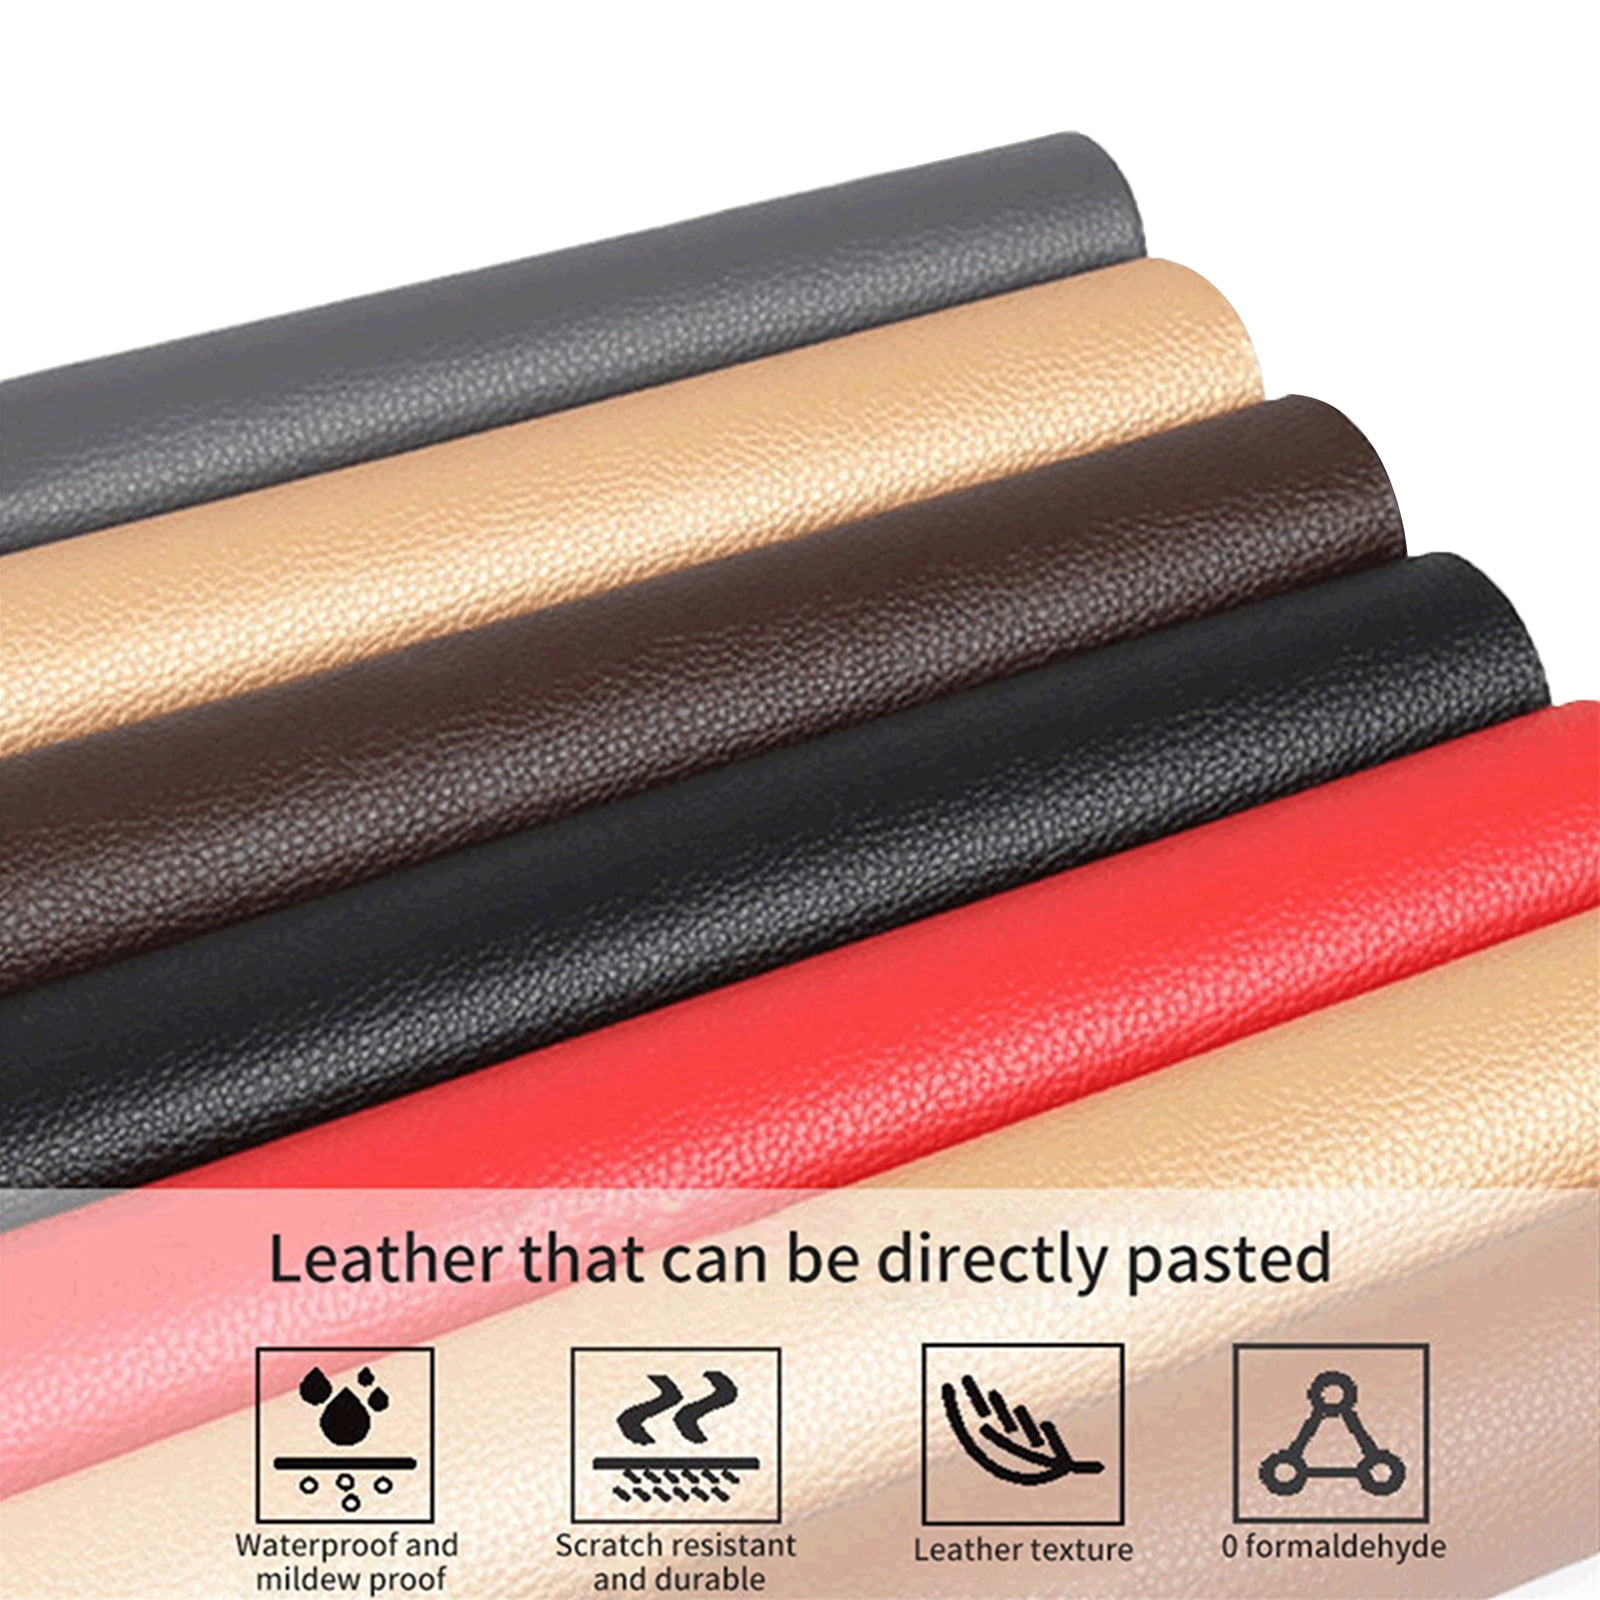  Printed Leather Repair Patch,Repair Patch Self Adhesive  Waterproof, DIY Large Leather Patches for Couches, Furniture, Kitchen  Cabinets, Wall (Black Flower,150 * 140cm)